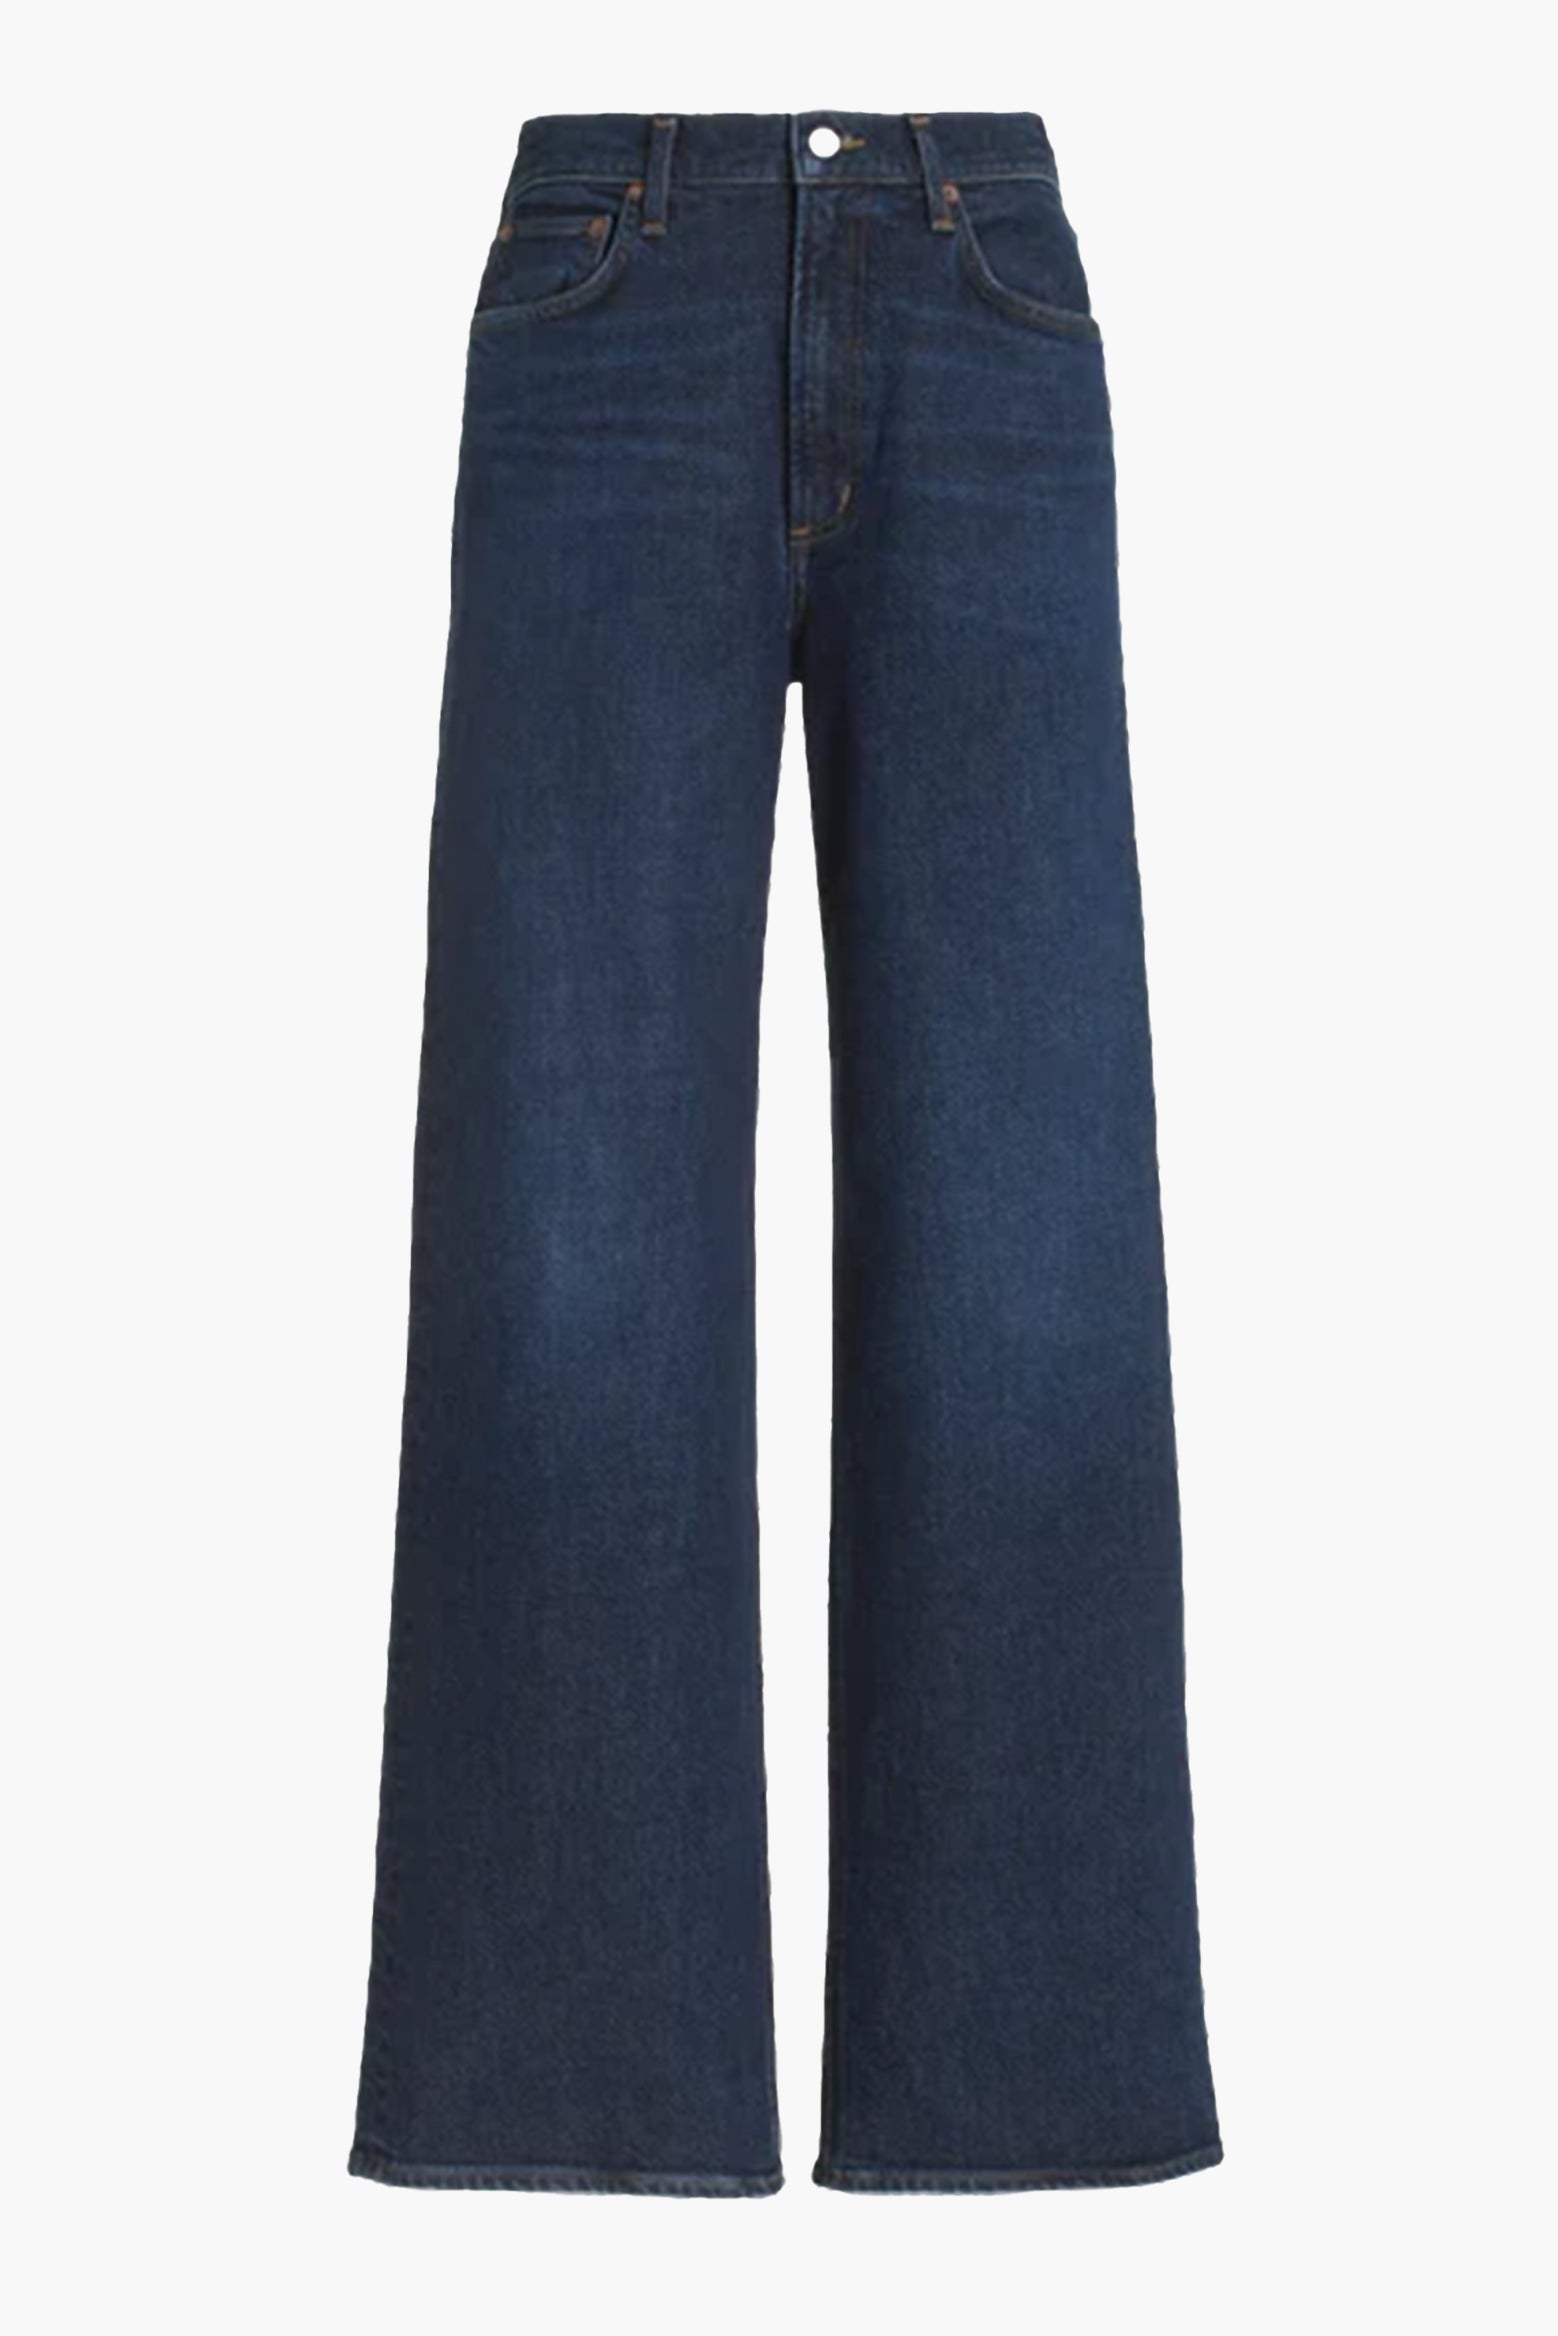 The AGOLDE Harper Mid Rise Wide Leg Jean in Tempo available at The New Trend.